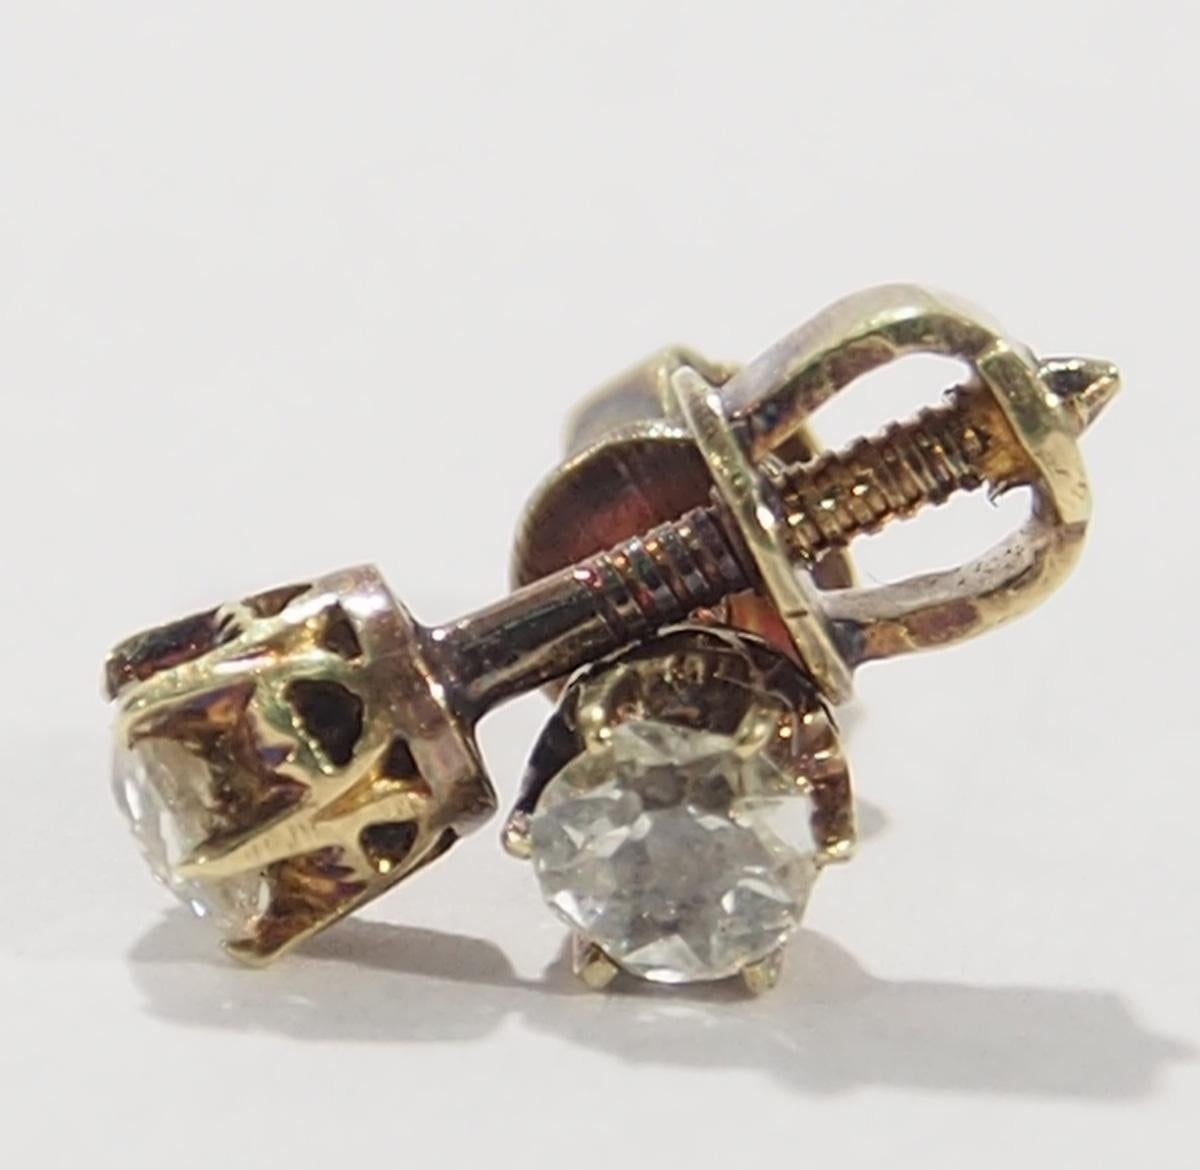 These are a delightful pair of 14K Yellow Gold Diamond Stud Earrings that would delight the Victorian Jewelry Collector. The Diamonds are Old European Cut, approximately 0.15ctw, G-J in Color, SI-I1 in Clarity. The Diamonds sit in an exquisitely